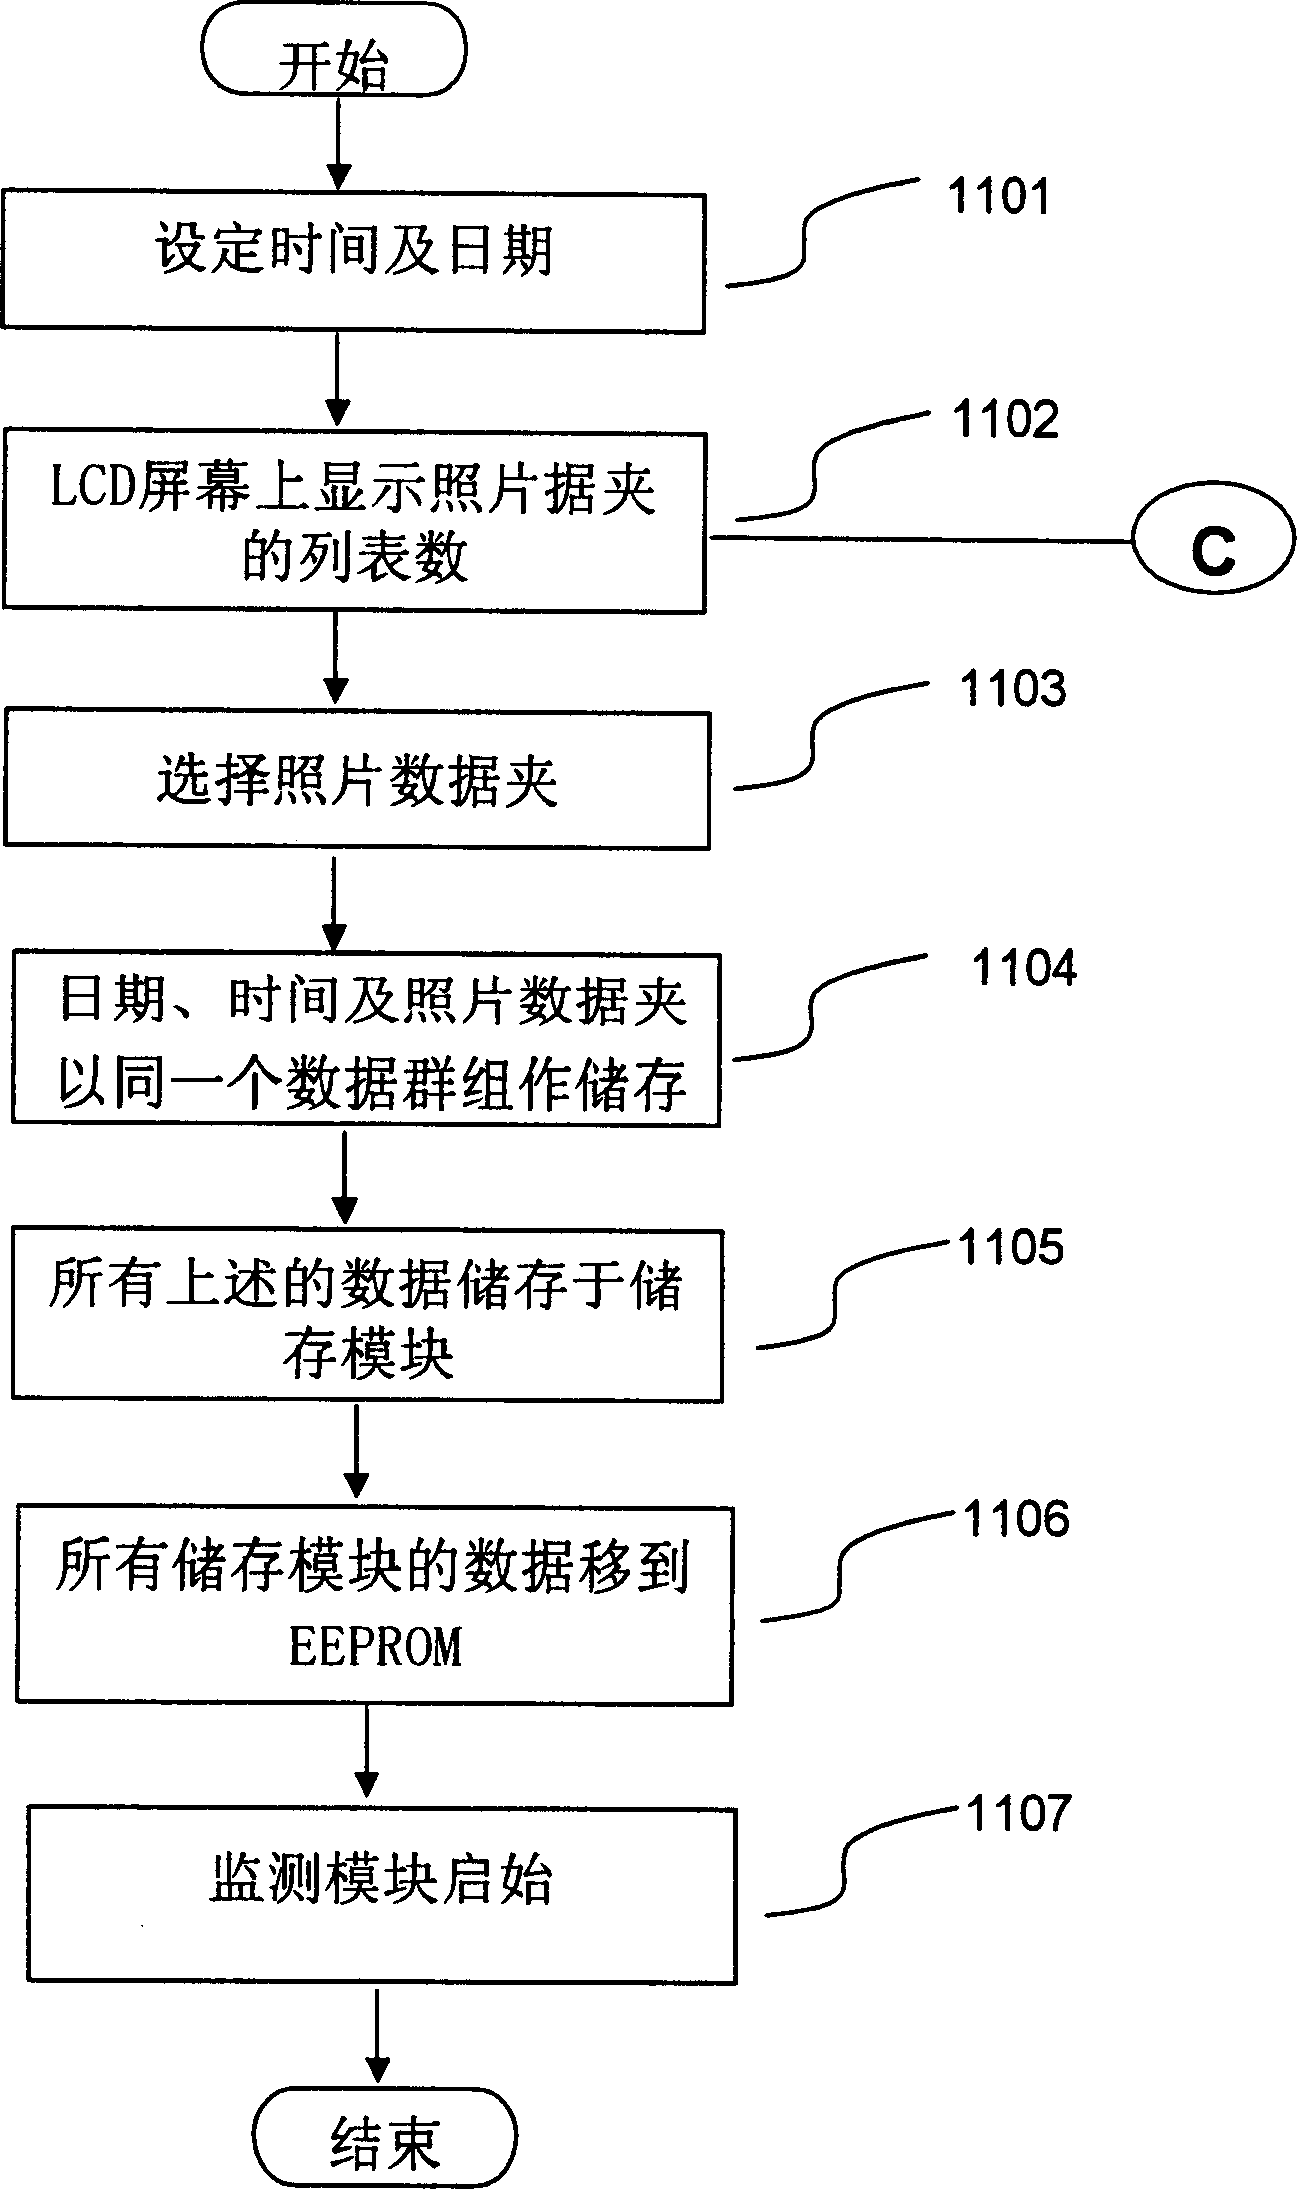 A multimedia alarm bell presenting method and apparatus thereof